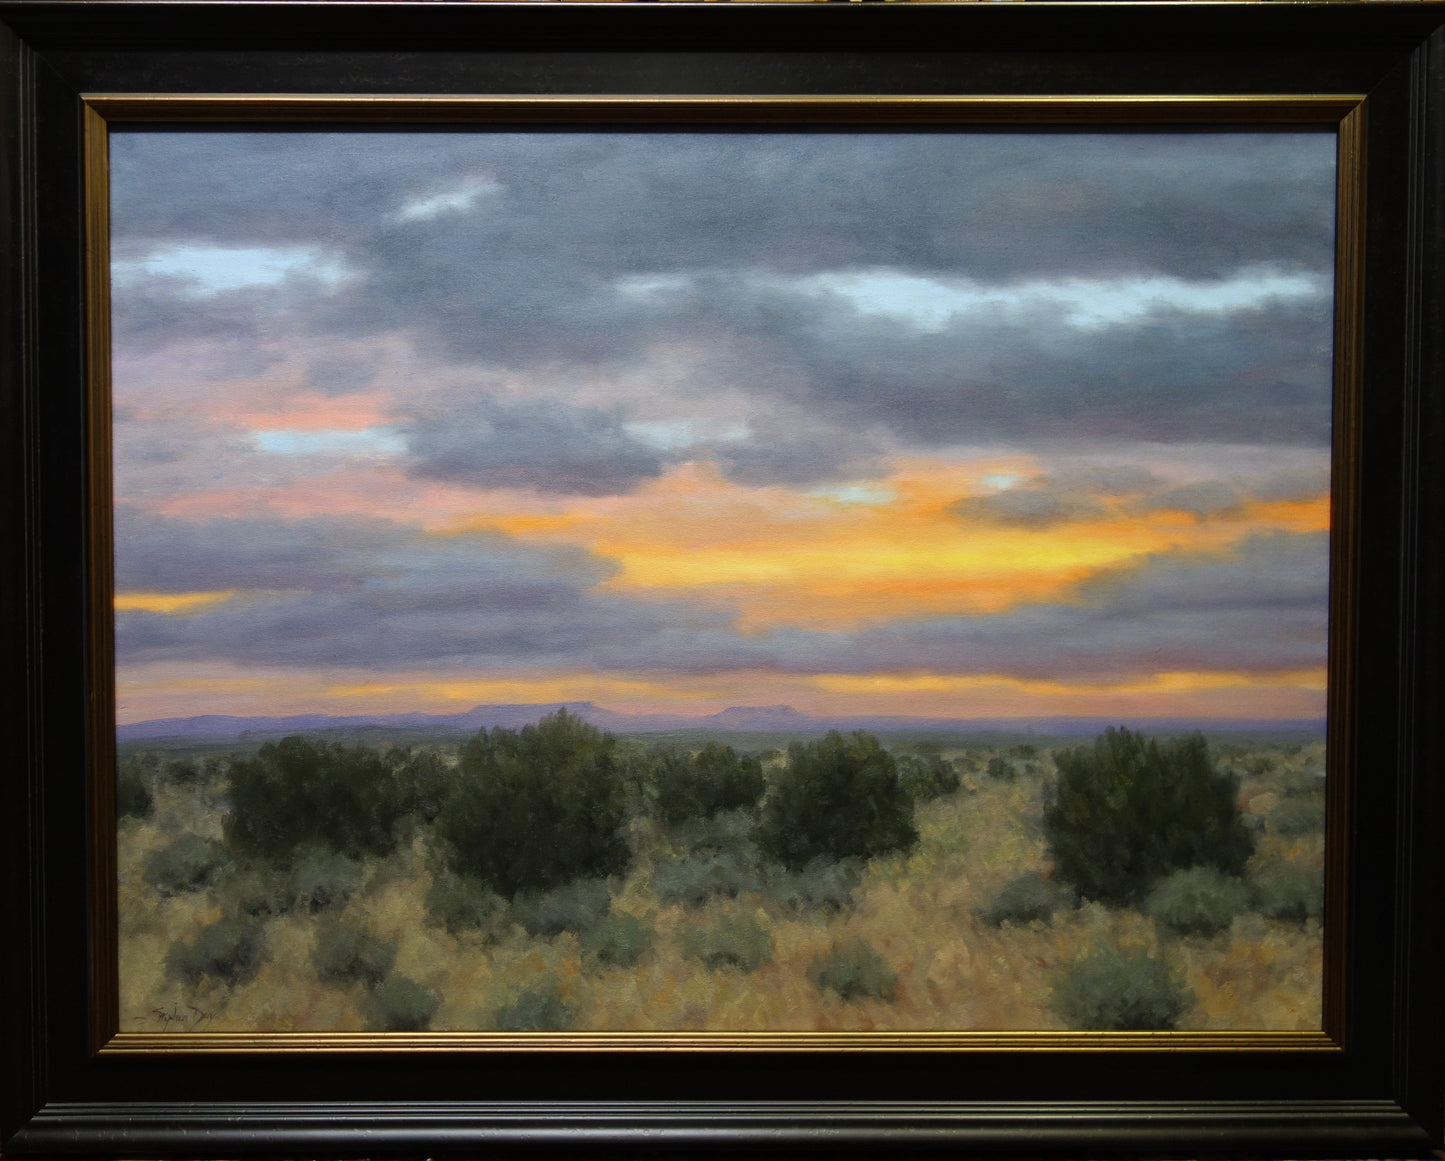 Morning Color-Painting-Stephen Day-Sorrel Sky Gallery